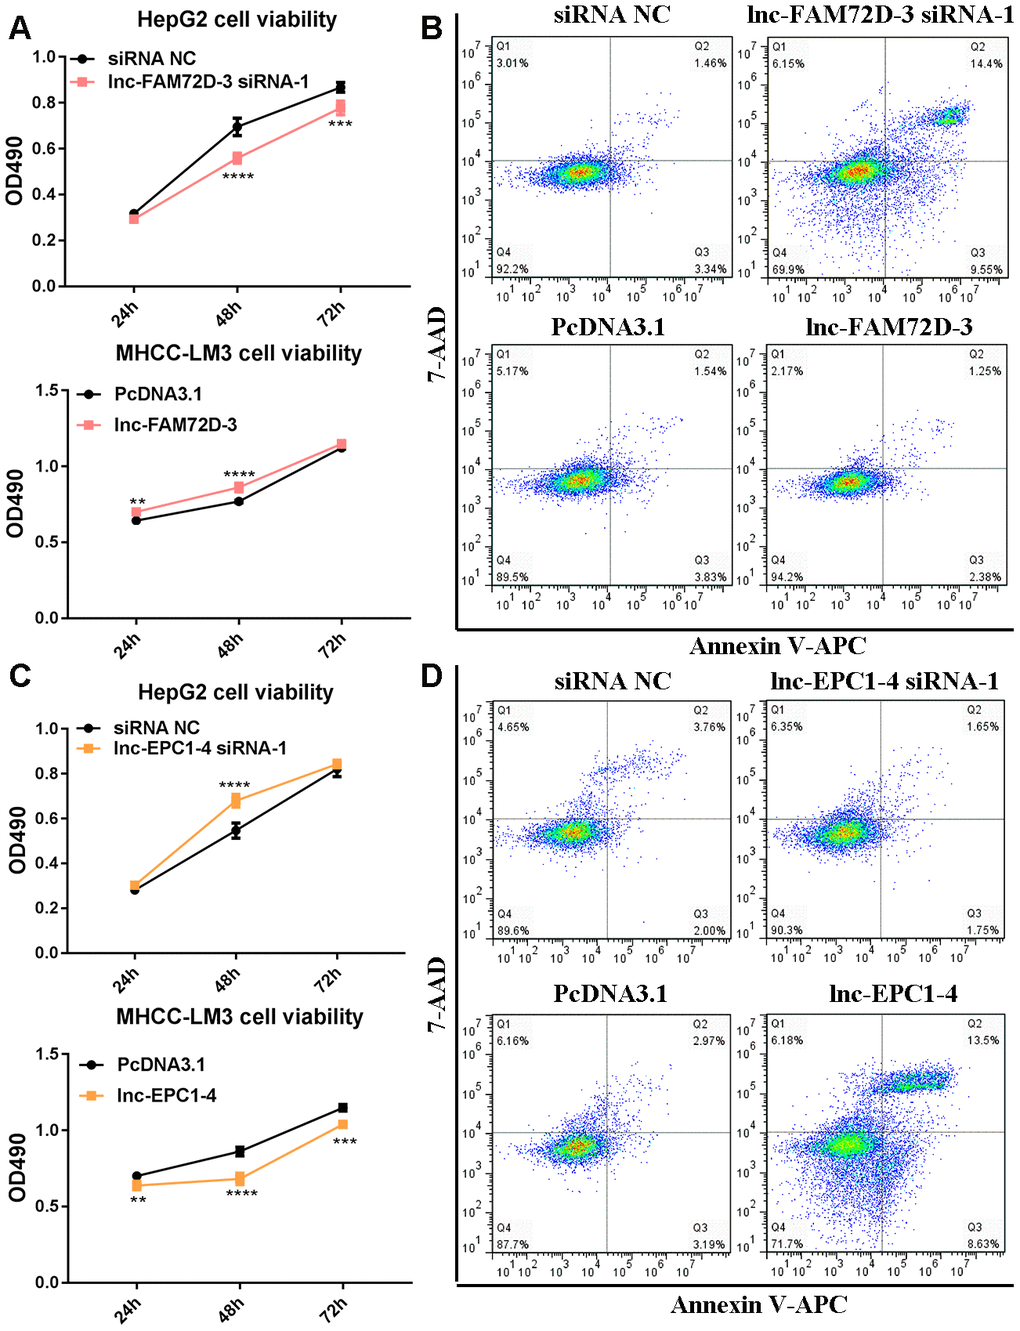 (A) Cell viability and (B) cell apoptosis in cells with lnc-FAM72D-3 suppression or overexpression. (C) Cell viability and (D) cell apoptosis in cells with lnc-EPC1-4 suppression or overexpression.